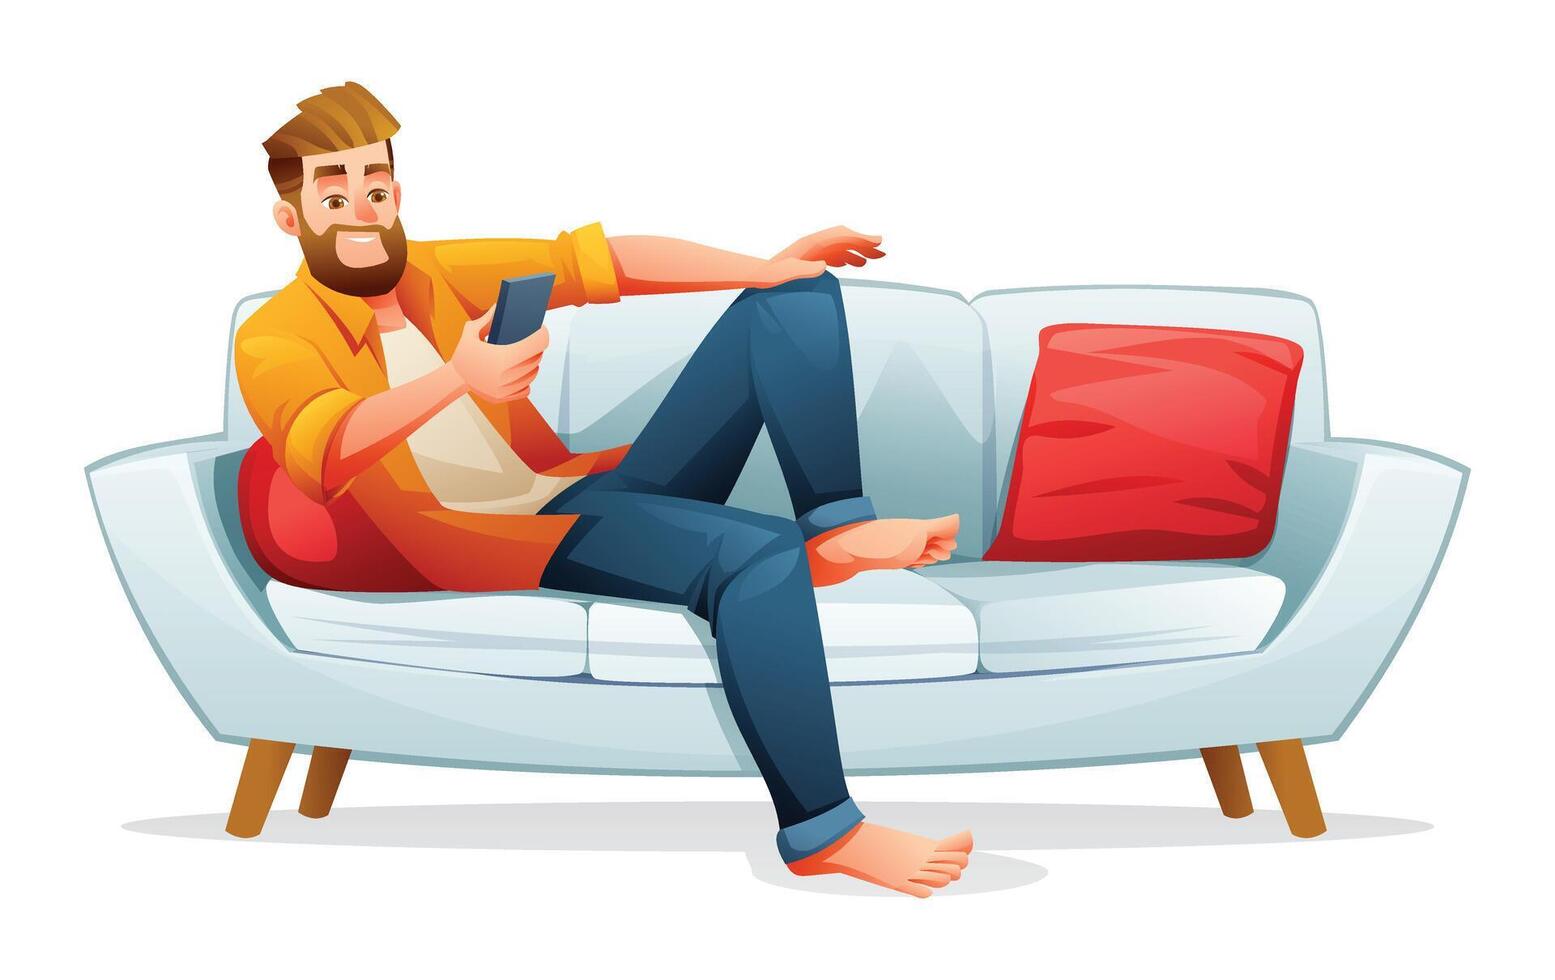 Man sitting on the sofa while using smartphone. illustration isolated on white background vector